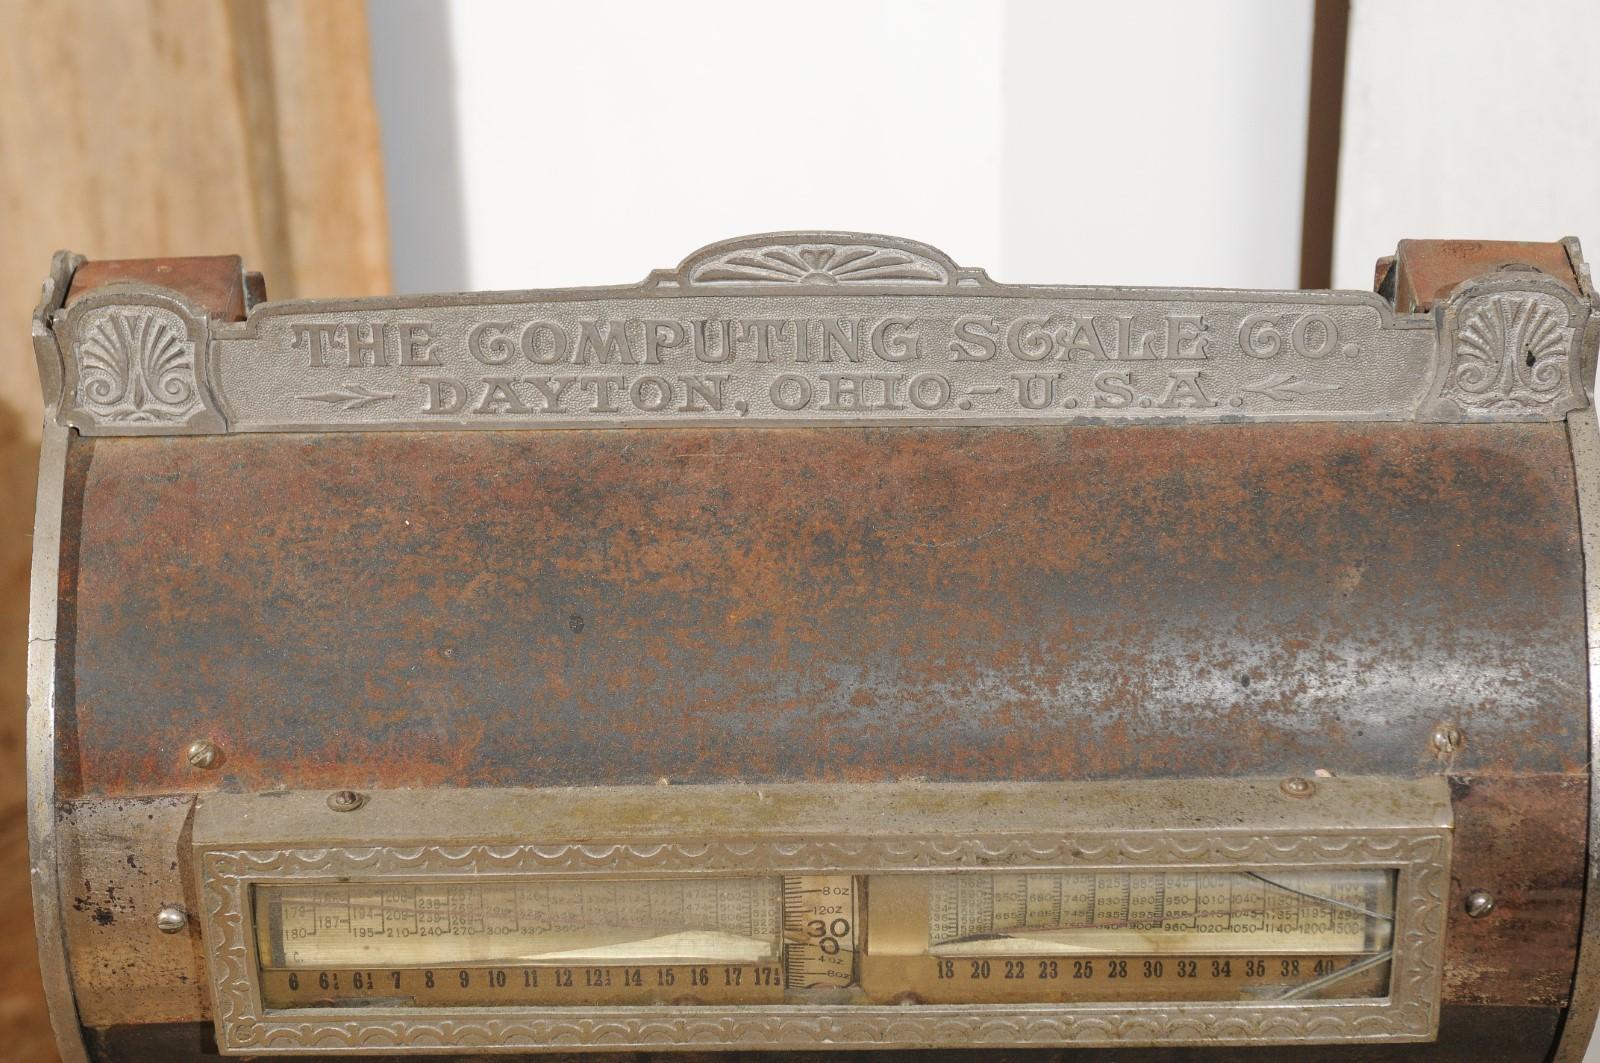 American Authentic 1905 Scale from the Computing Scale Company from Dayton, Ohio